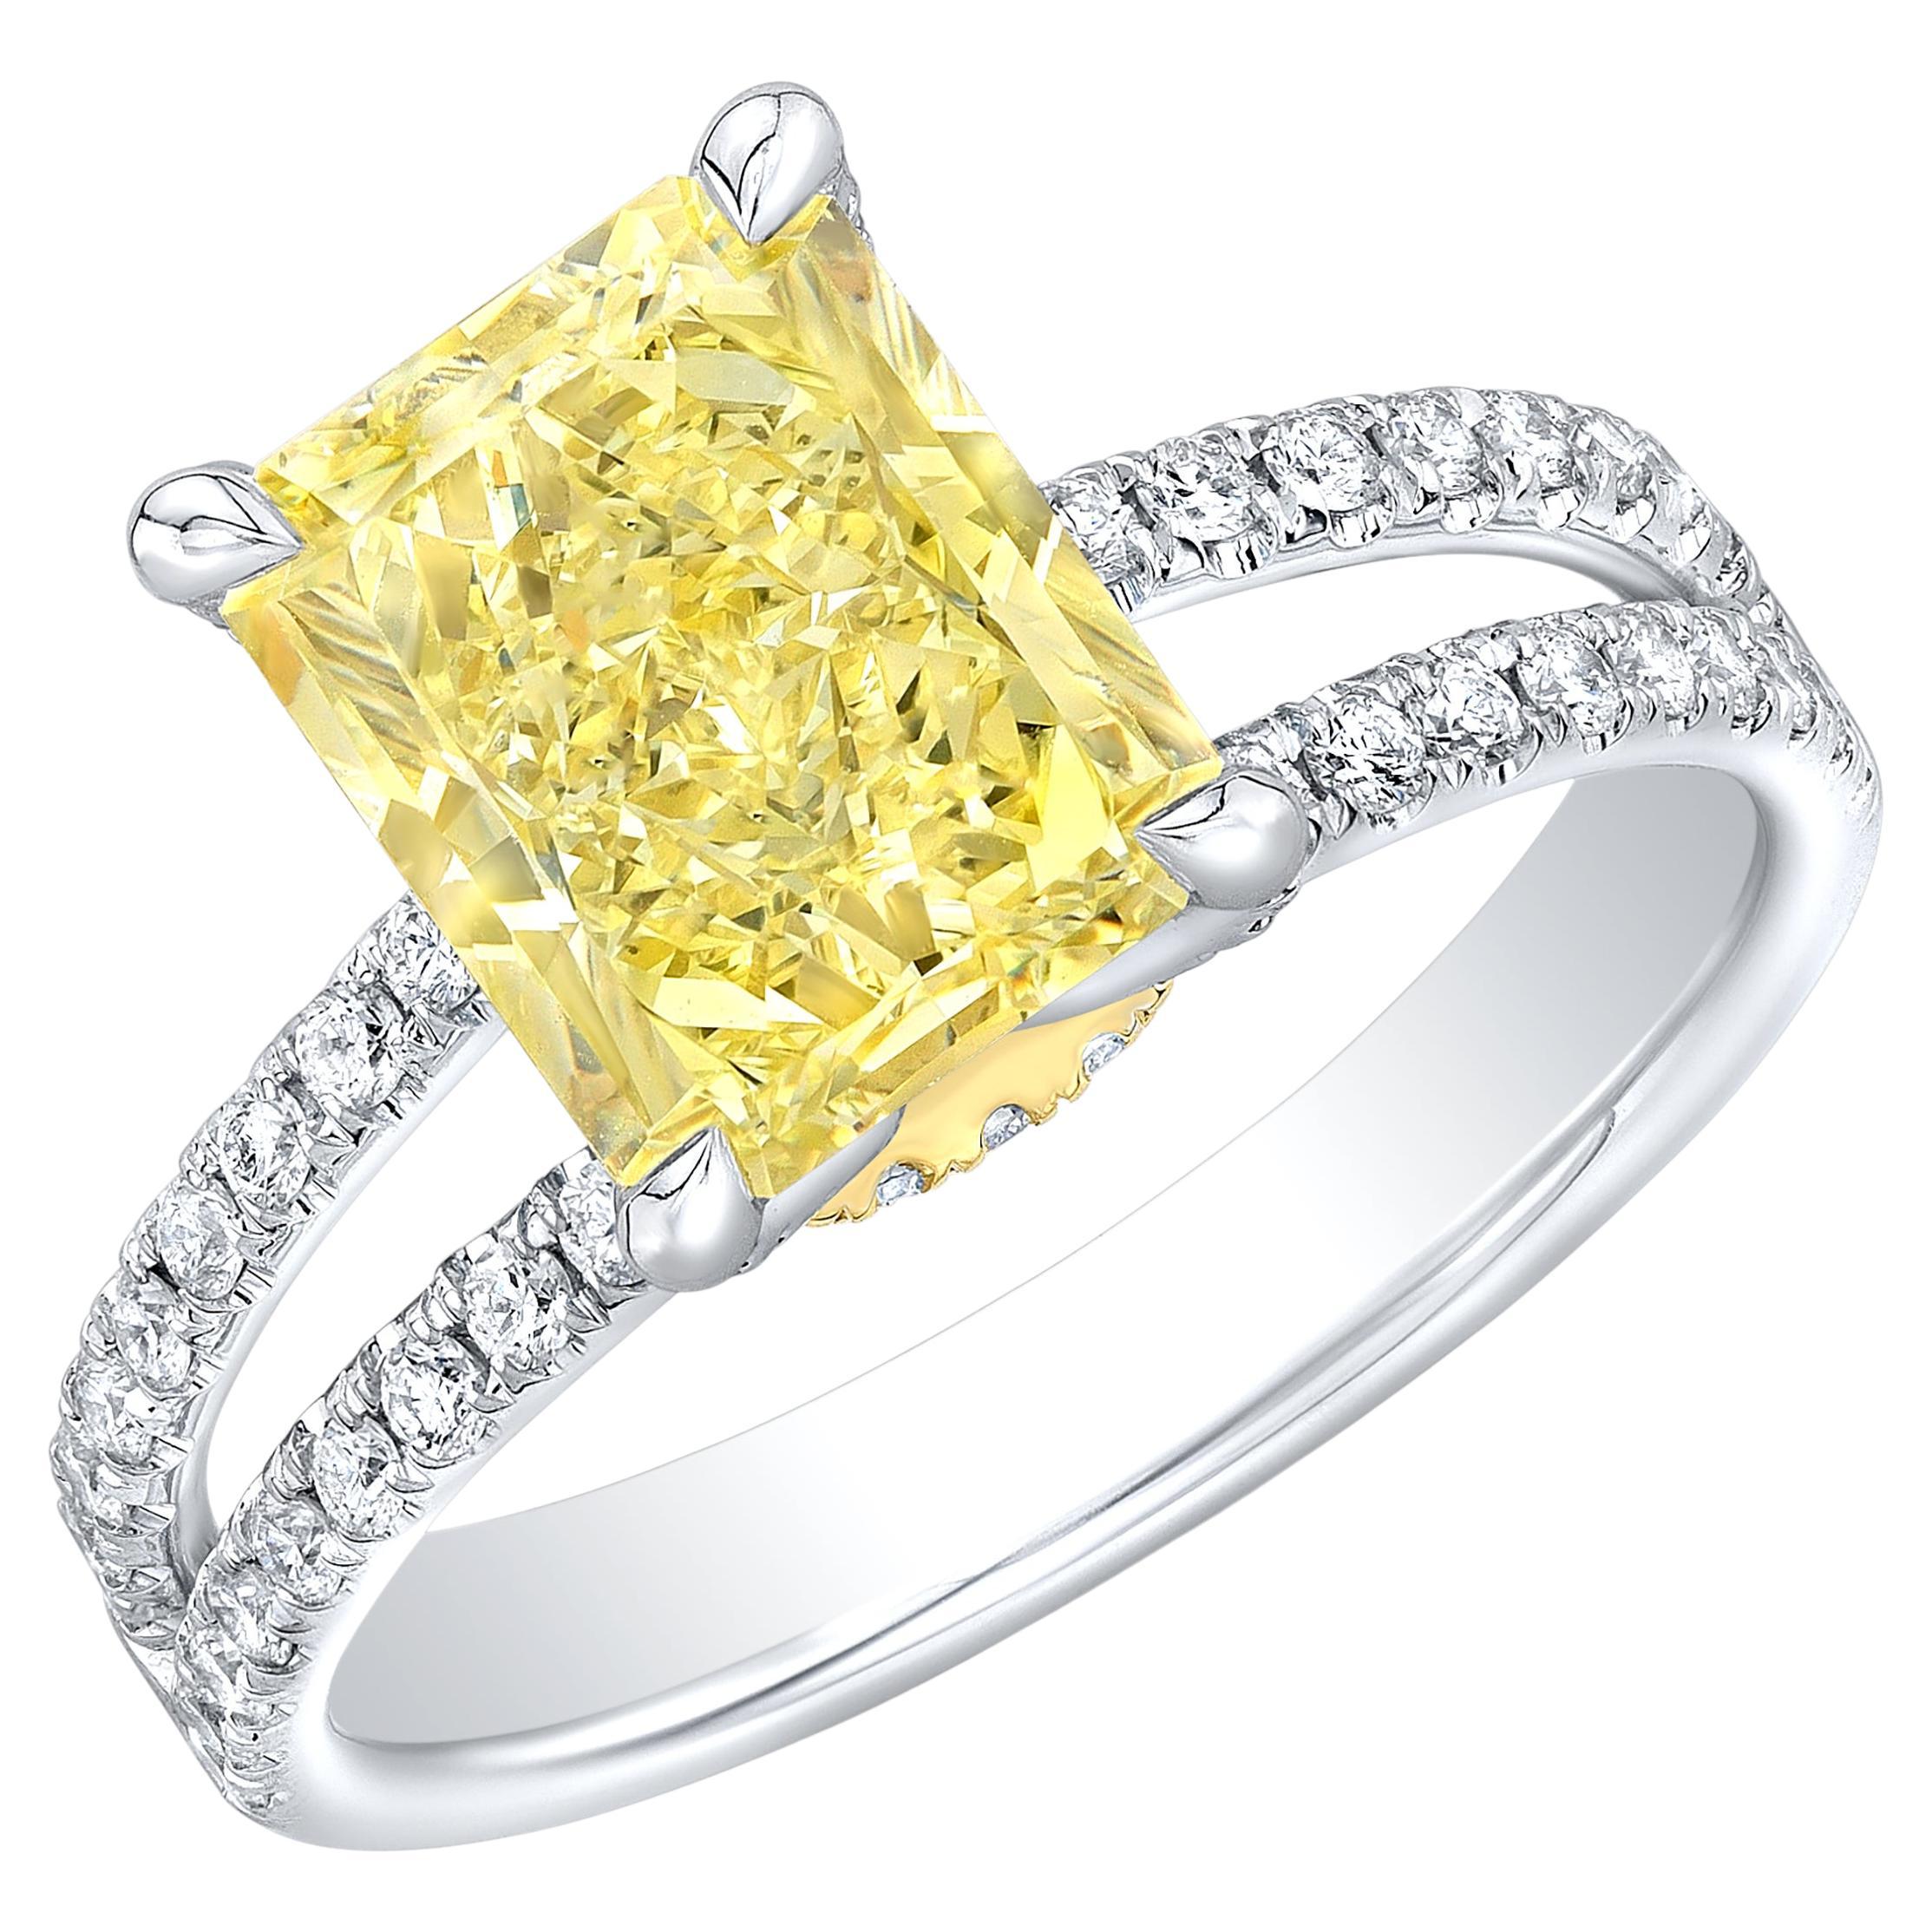 2.66ct Rectangular Radiant Cut Canary Yellow Diamond Engagement Ring VS1 For Sale